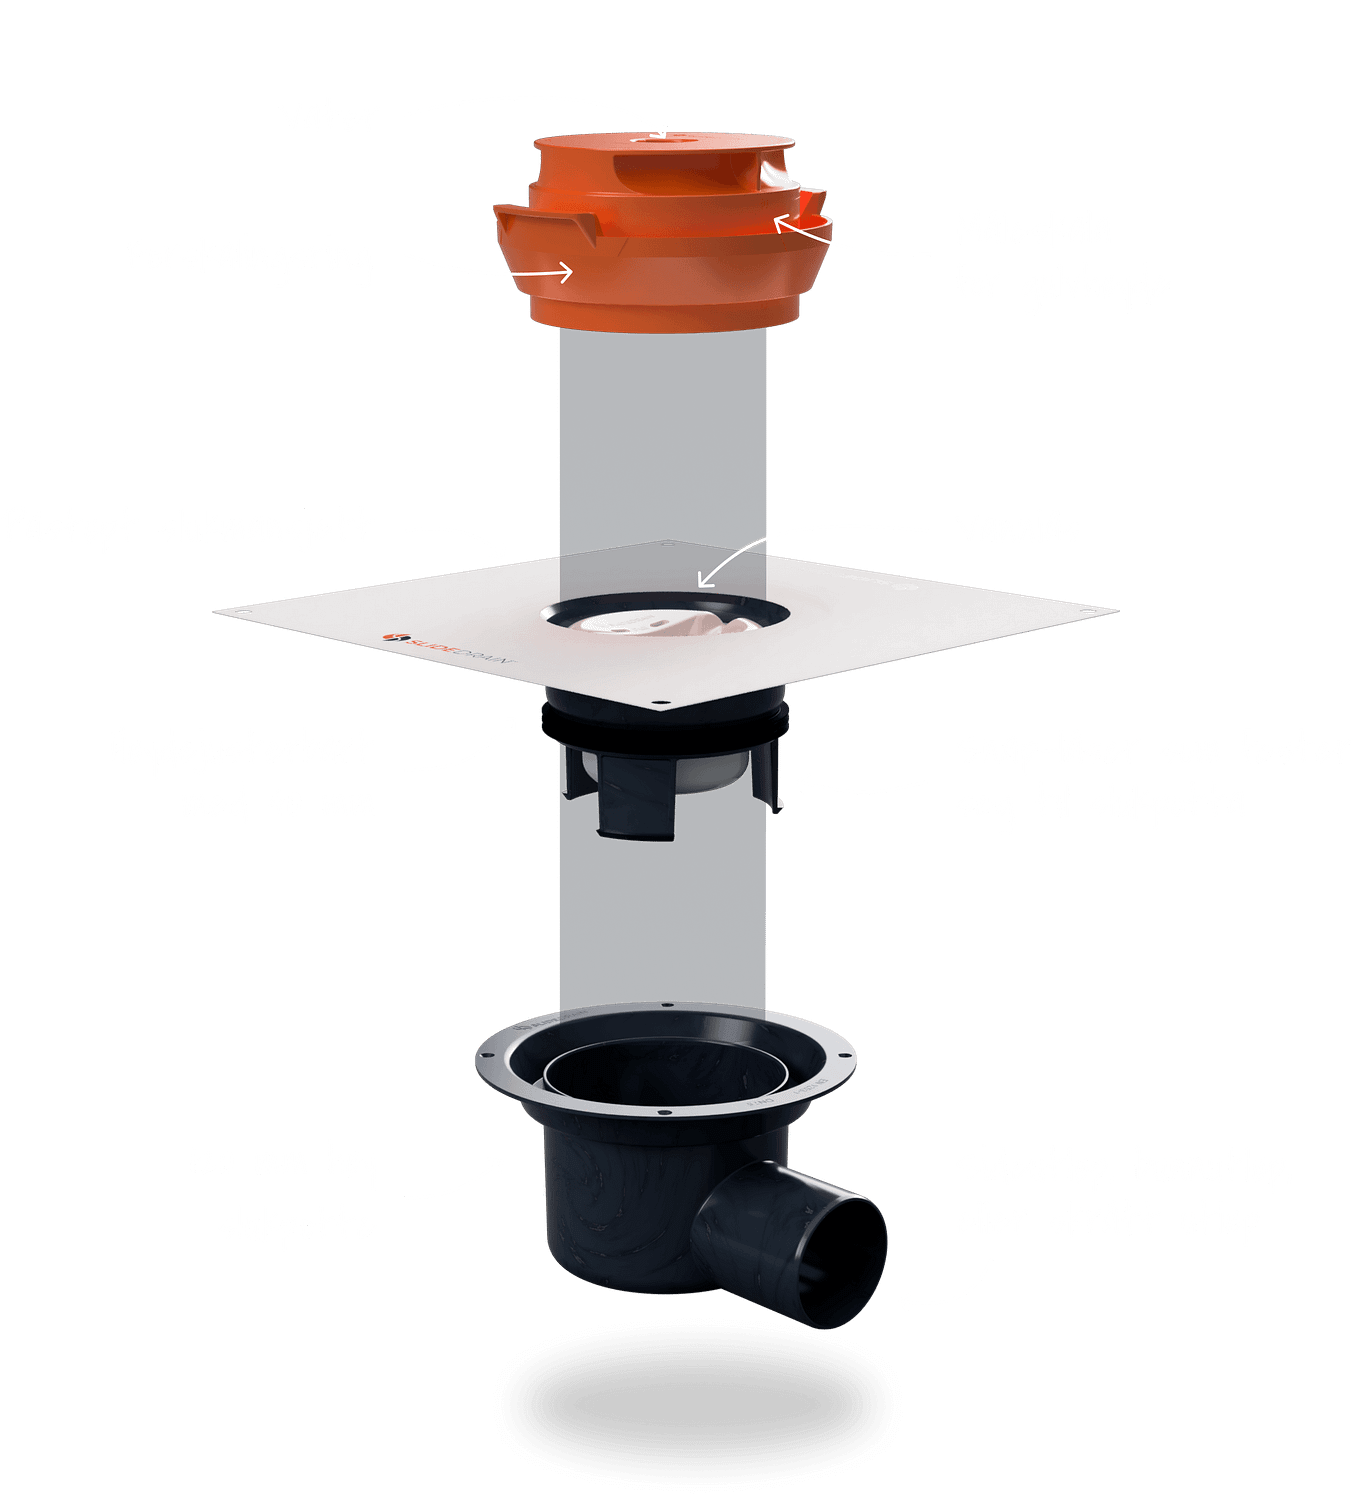 Slidedrain Exploded View